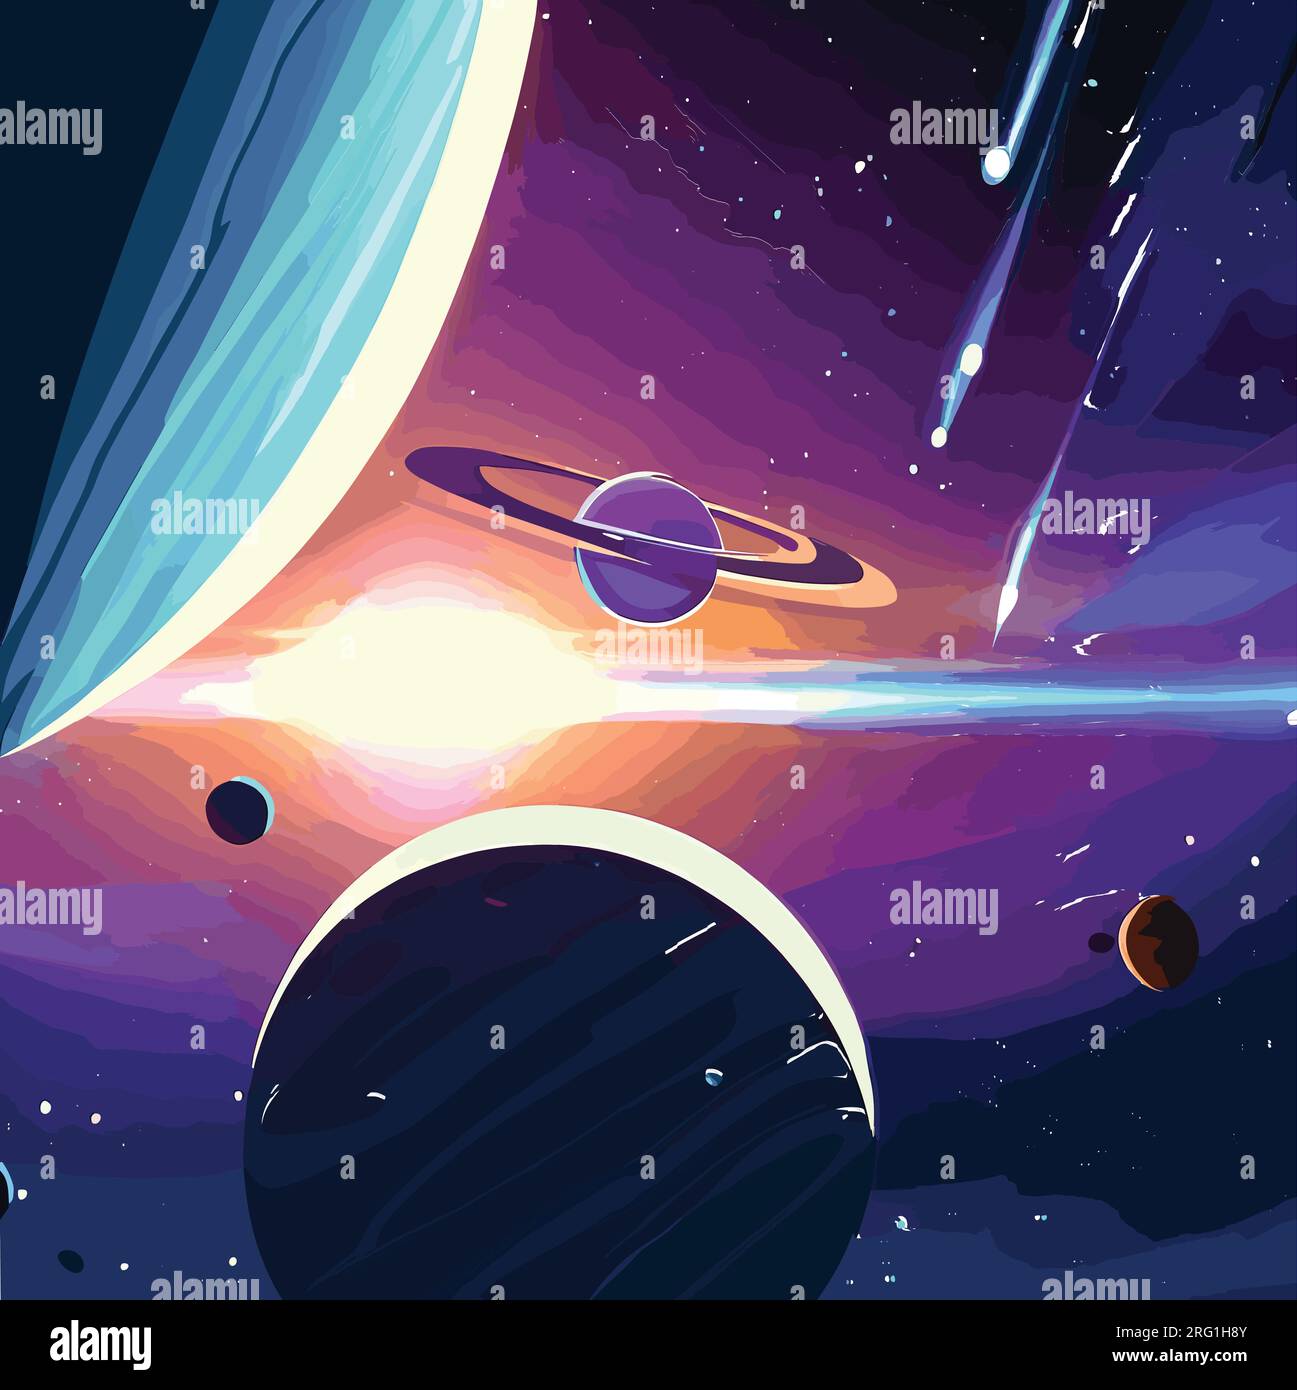 Flat illustration of the outer space Stock Vector